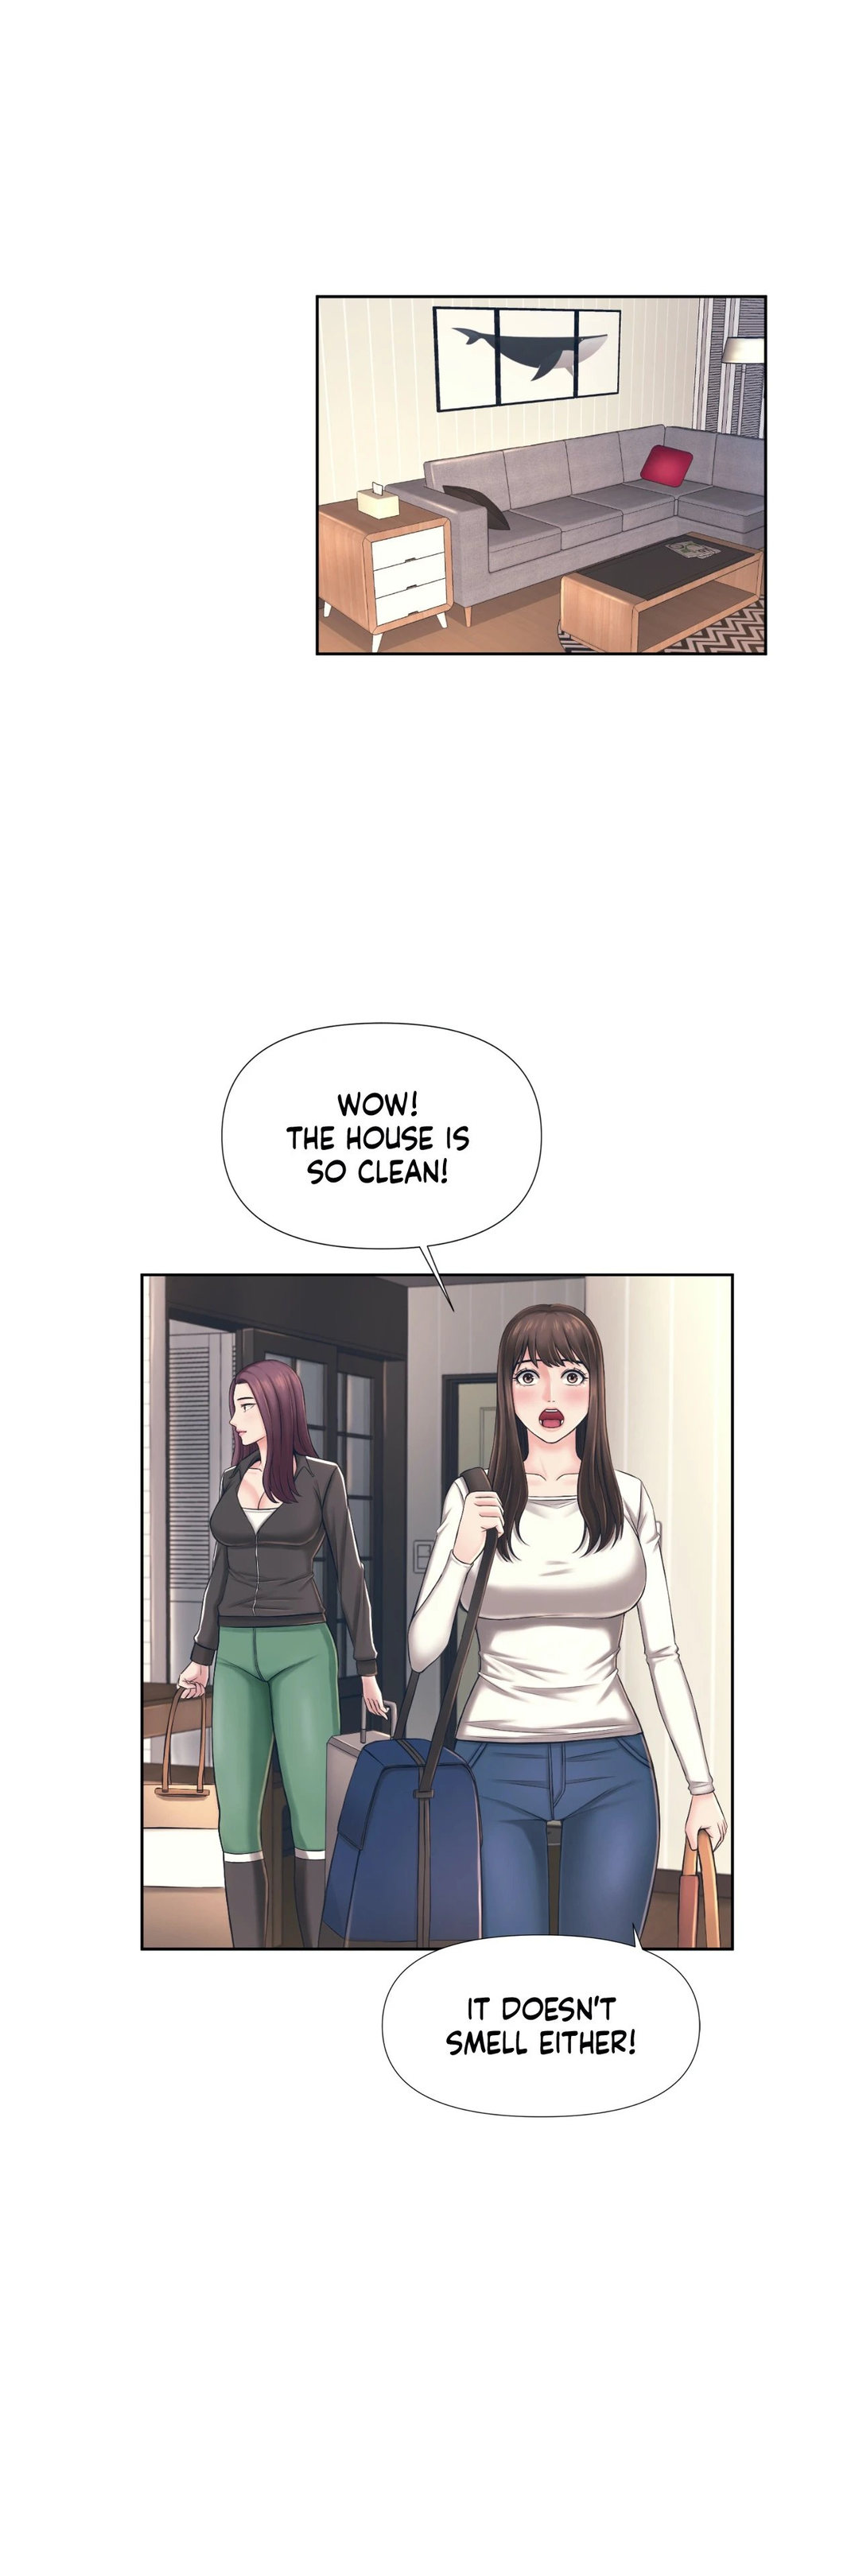 Roommates with benefits - Chapter 1 Page 23